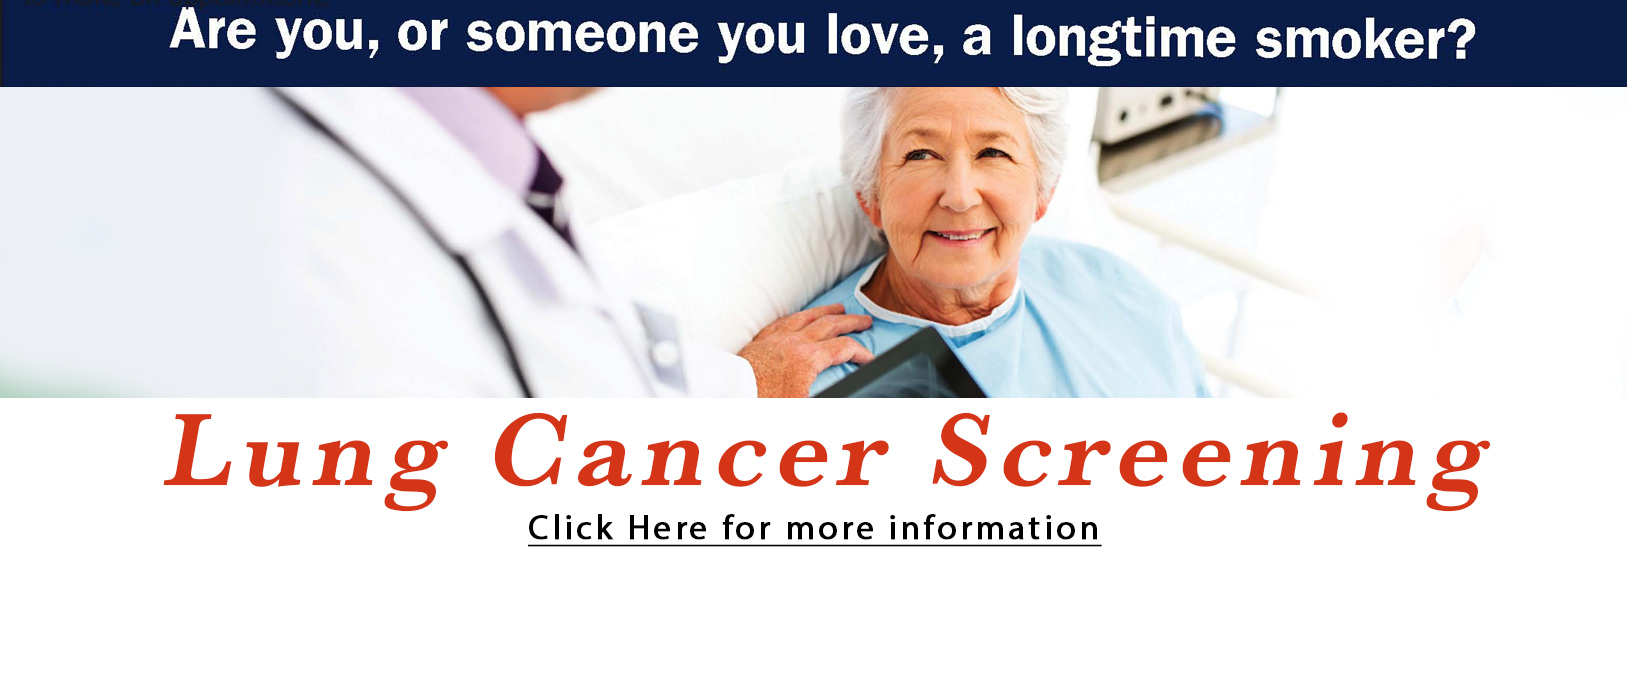 Are you, or someone you love, a longtime smoker?
Lung Cancer Screening
Click Here for more information